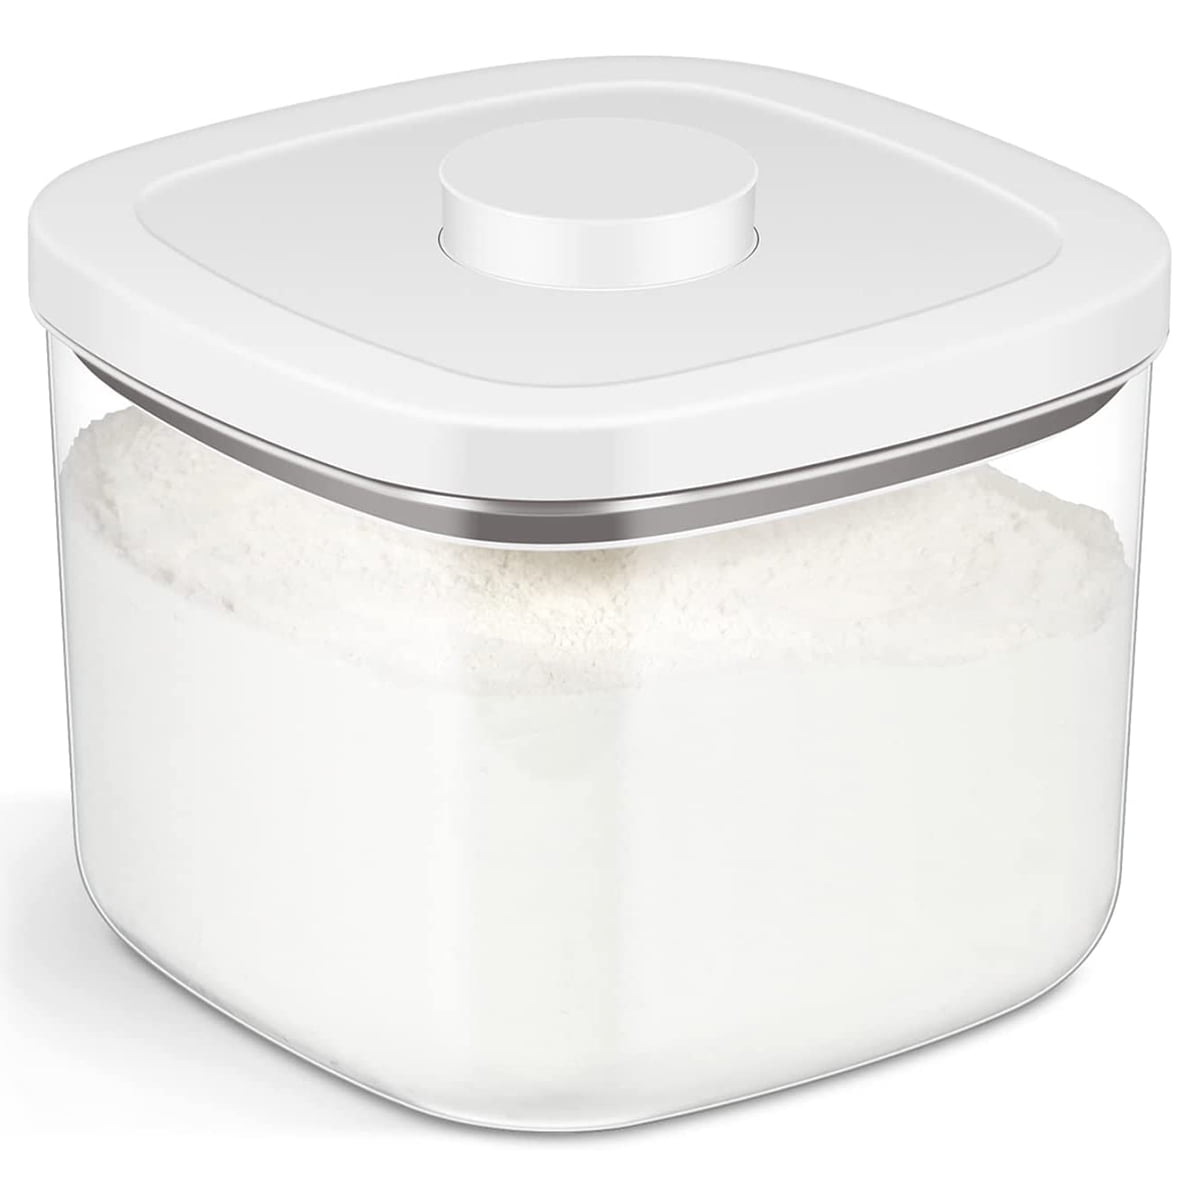 Rice Storage Container 10kG, Rice Storage Container 10kG Price: 4699/- To  place an order Visit-->  Subscribe to Our   Channel ▻  By Homazing